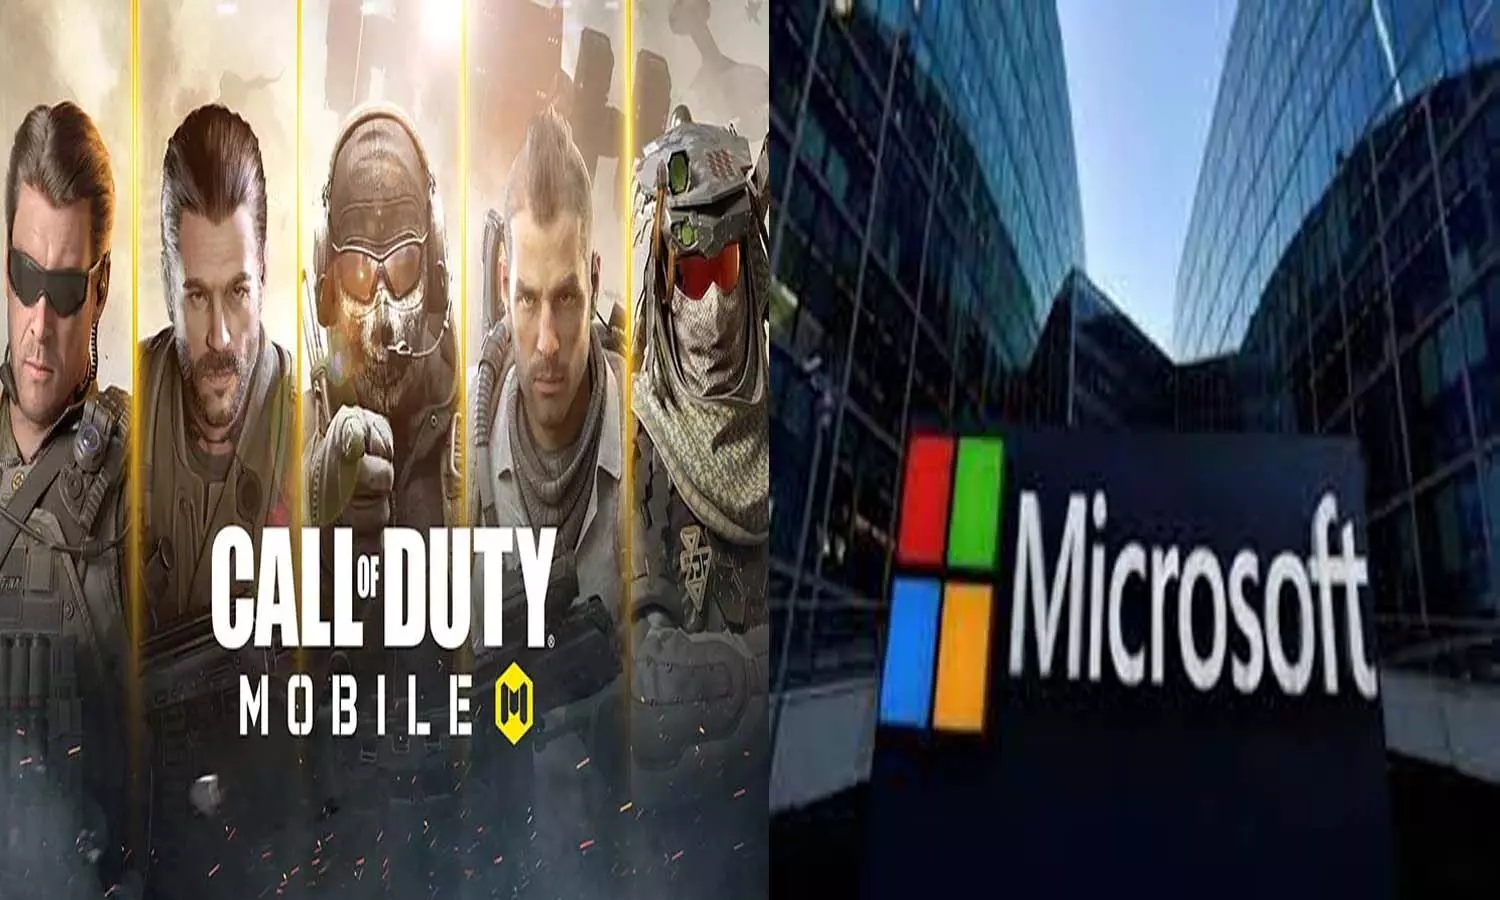 Call of Duty will come on Nintendo, Microsofts historic agreement